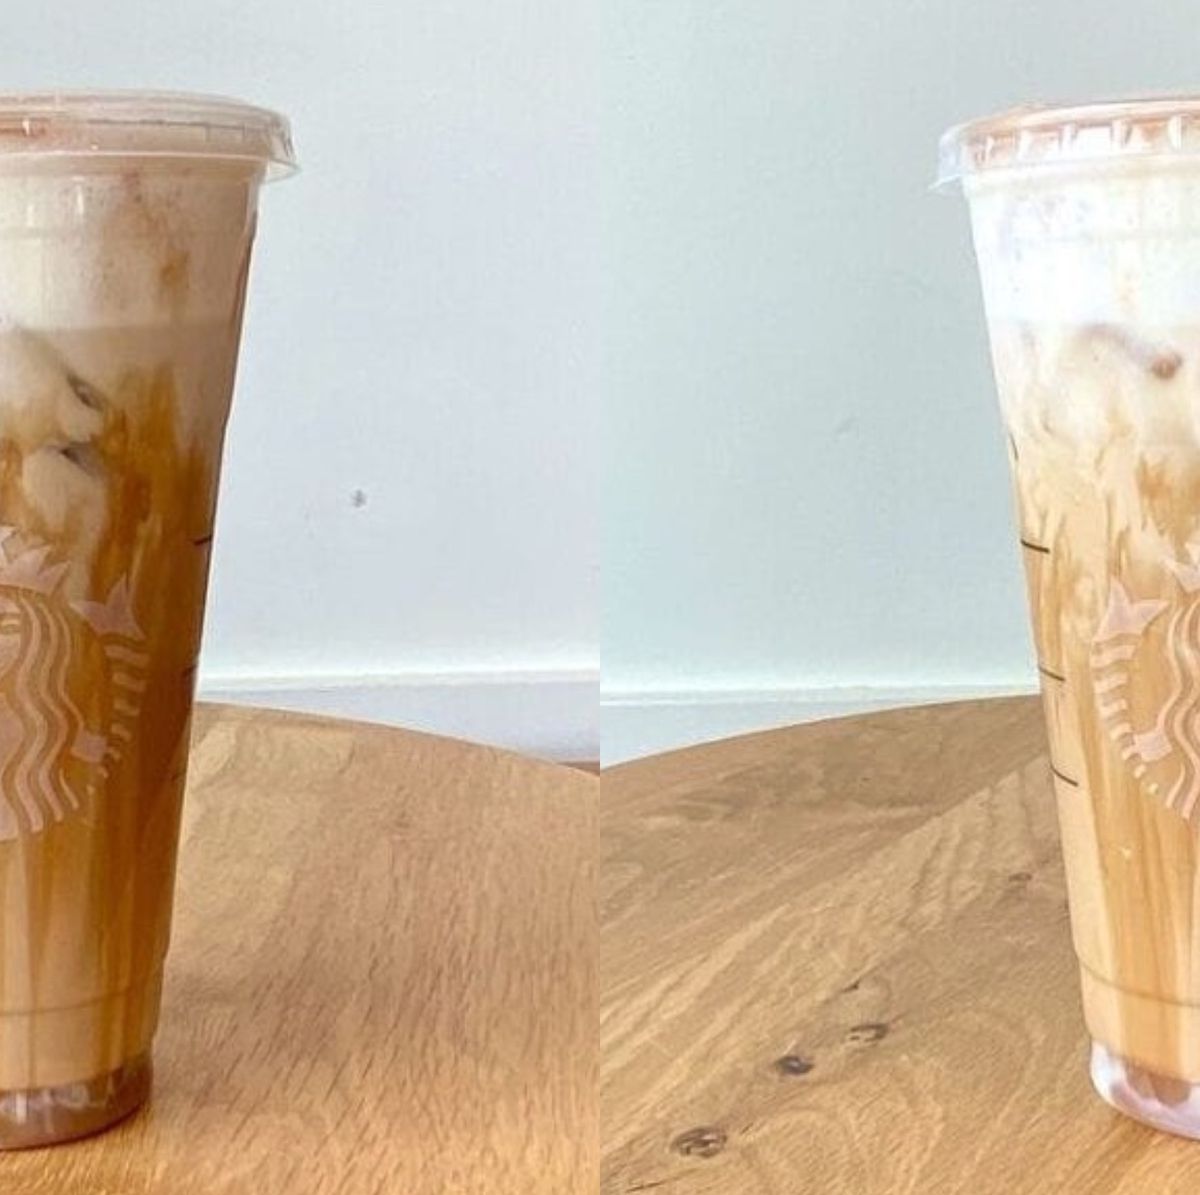 How To Order A Salted Caramel White Mocha Cold Brew From Starbucks